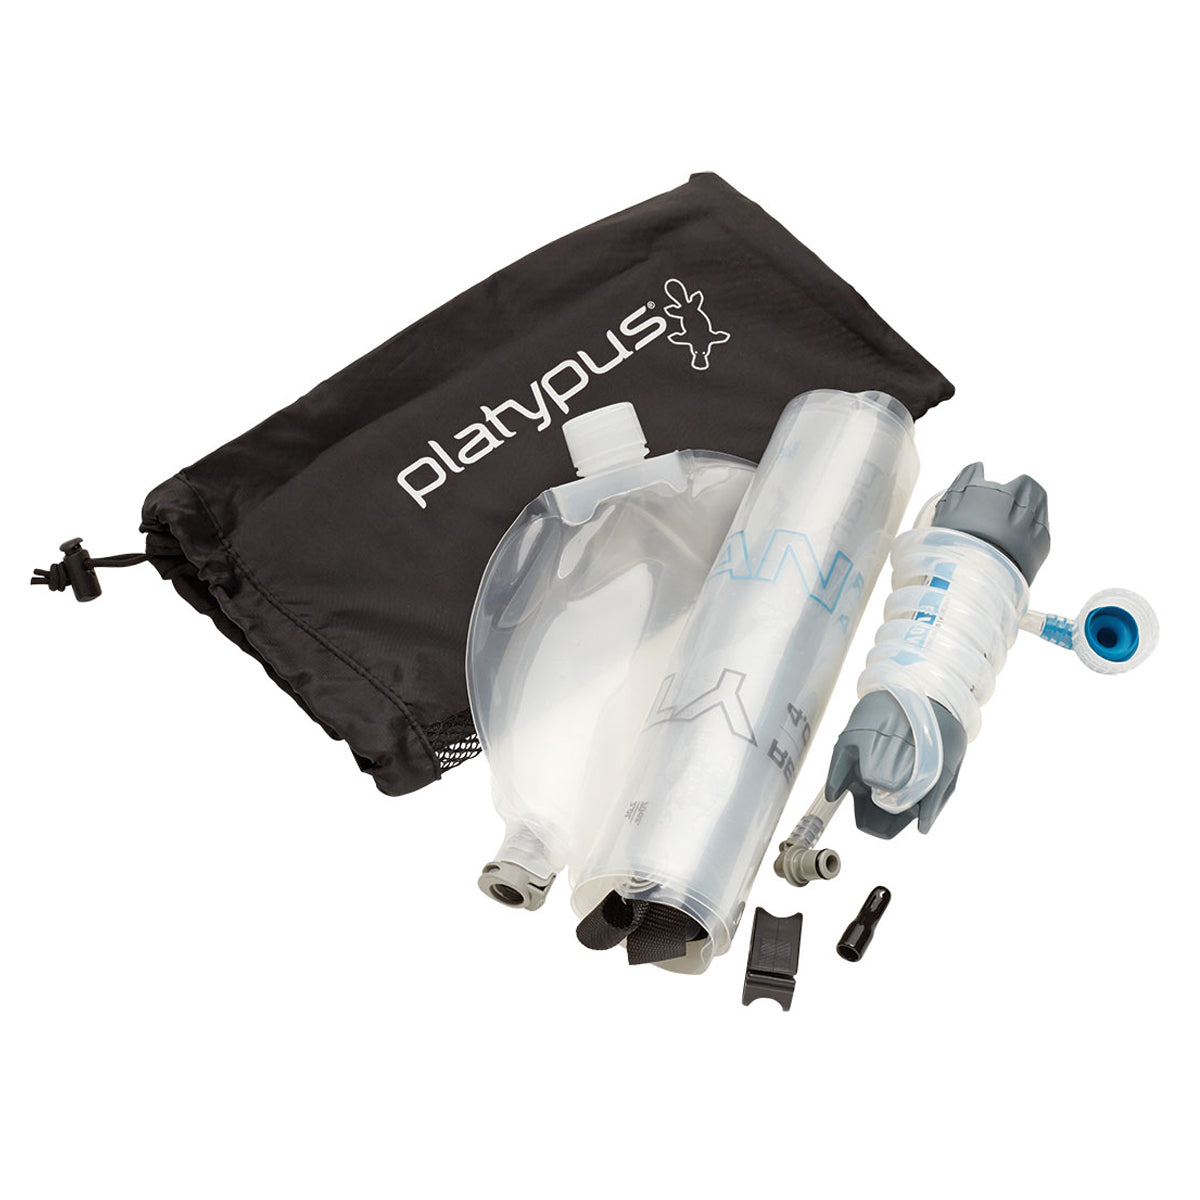 Platypus GravityWorks 4L Water Filter System by Platypus | Camping - goHUNT Shop